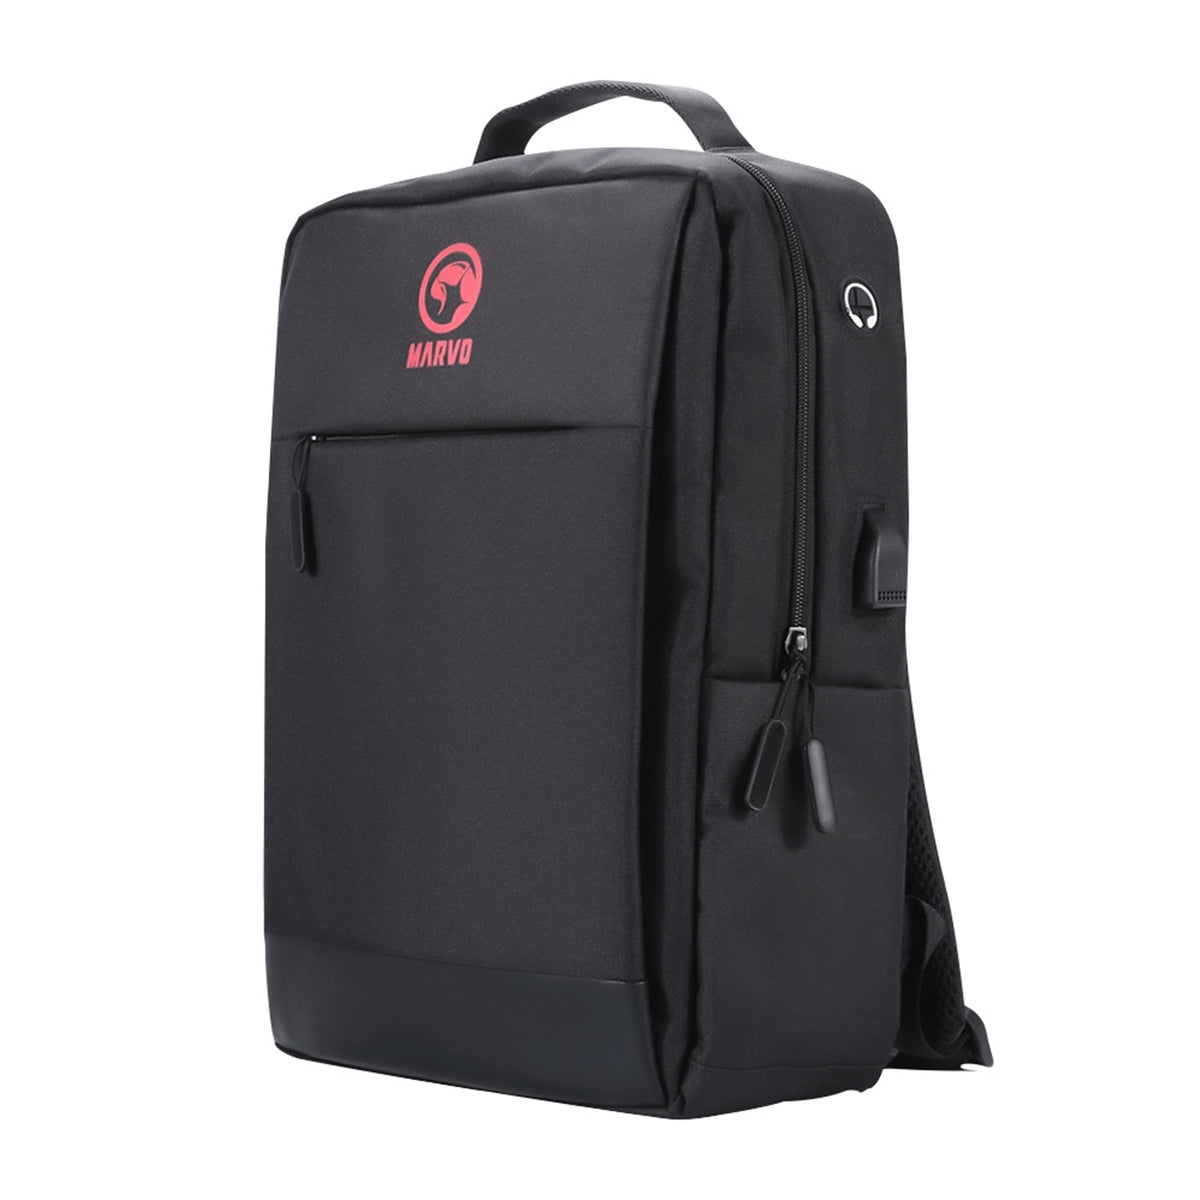 Marvo Back To School Backpack Bundle for 15.6&quot; Laptop with USB Charging Port - Black | 033772 from Marvo - DID Electrical